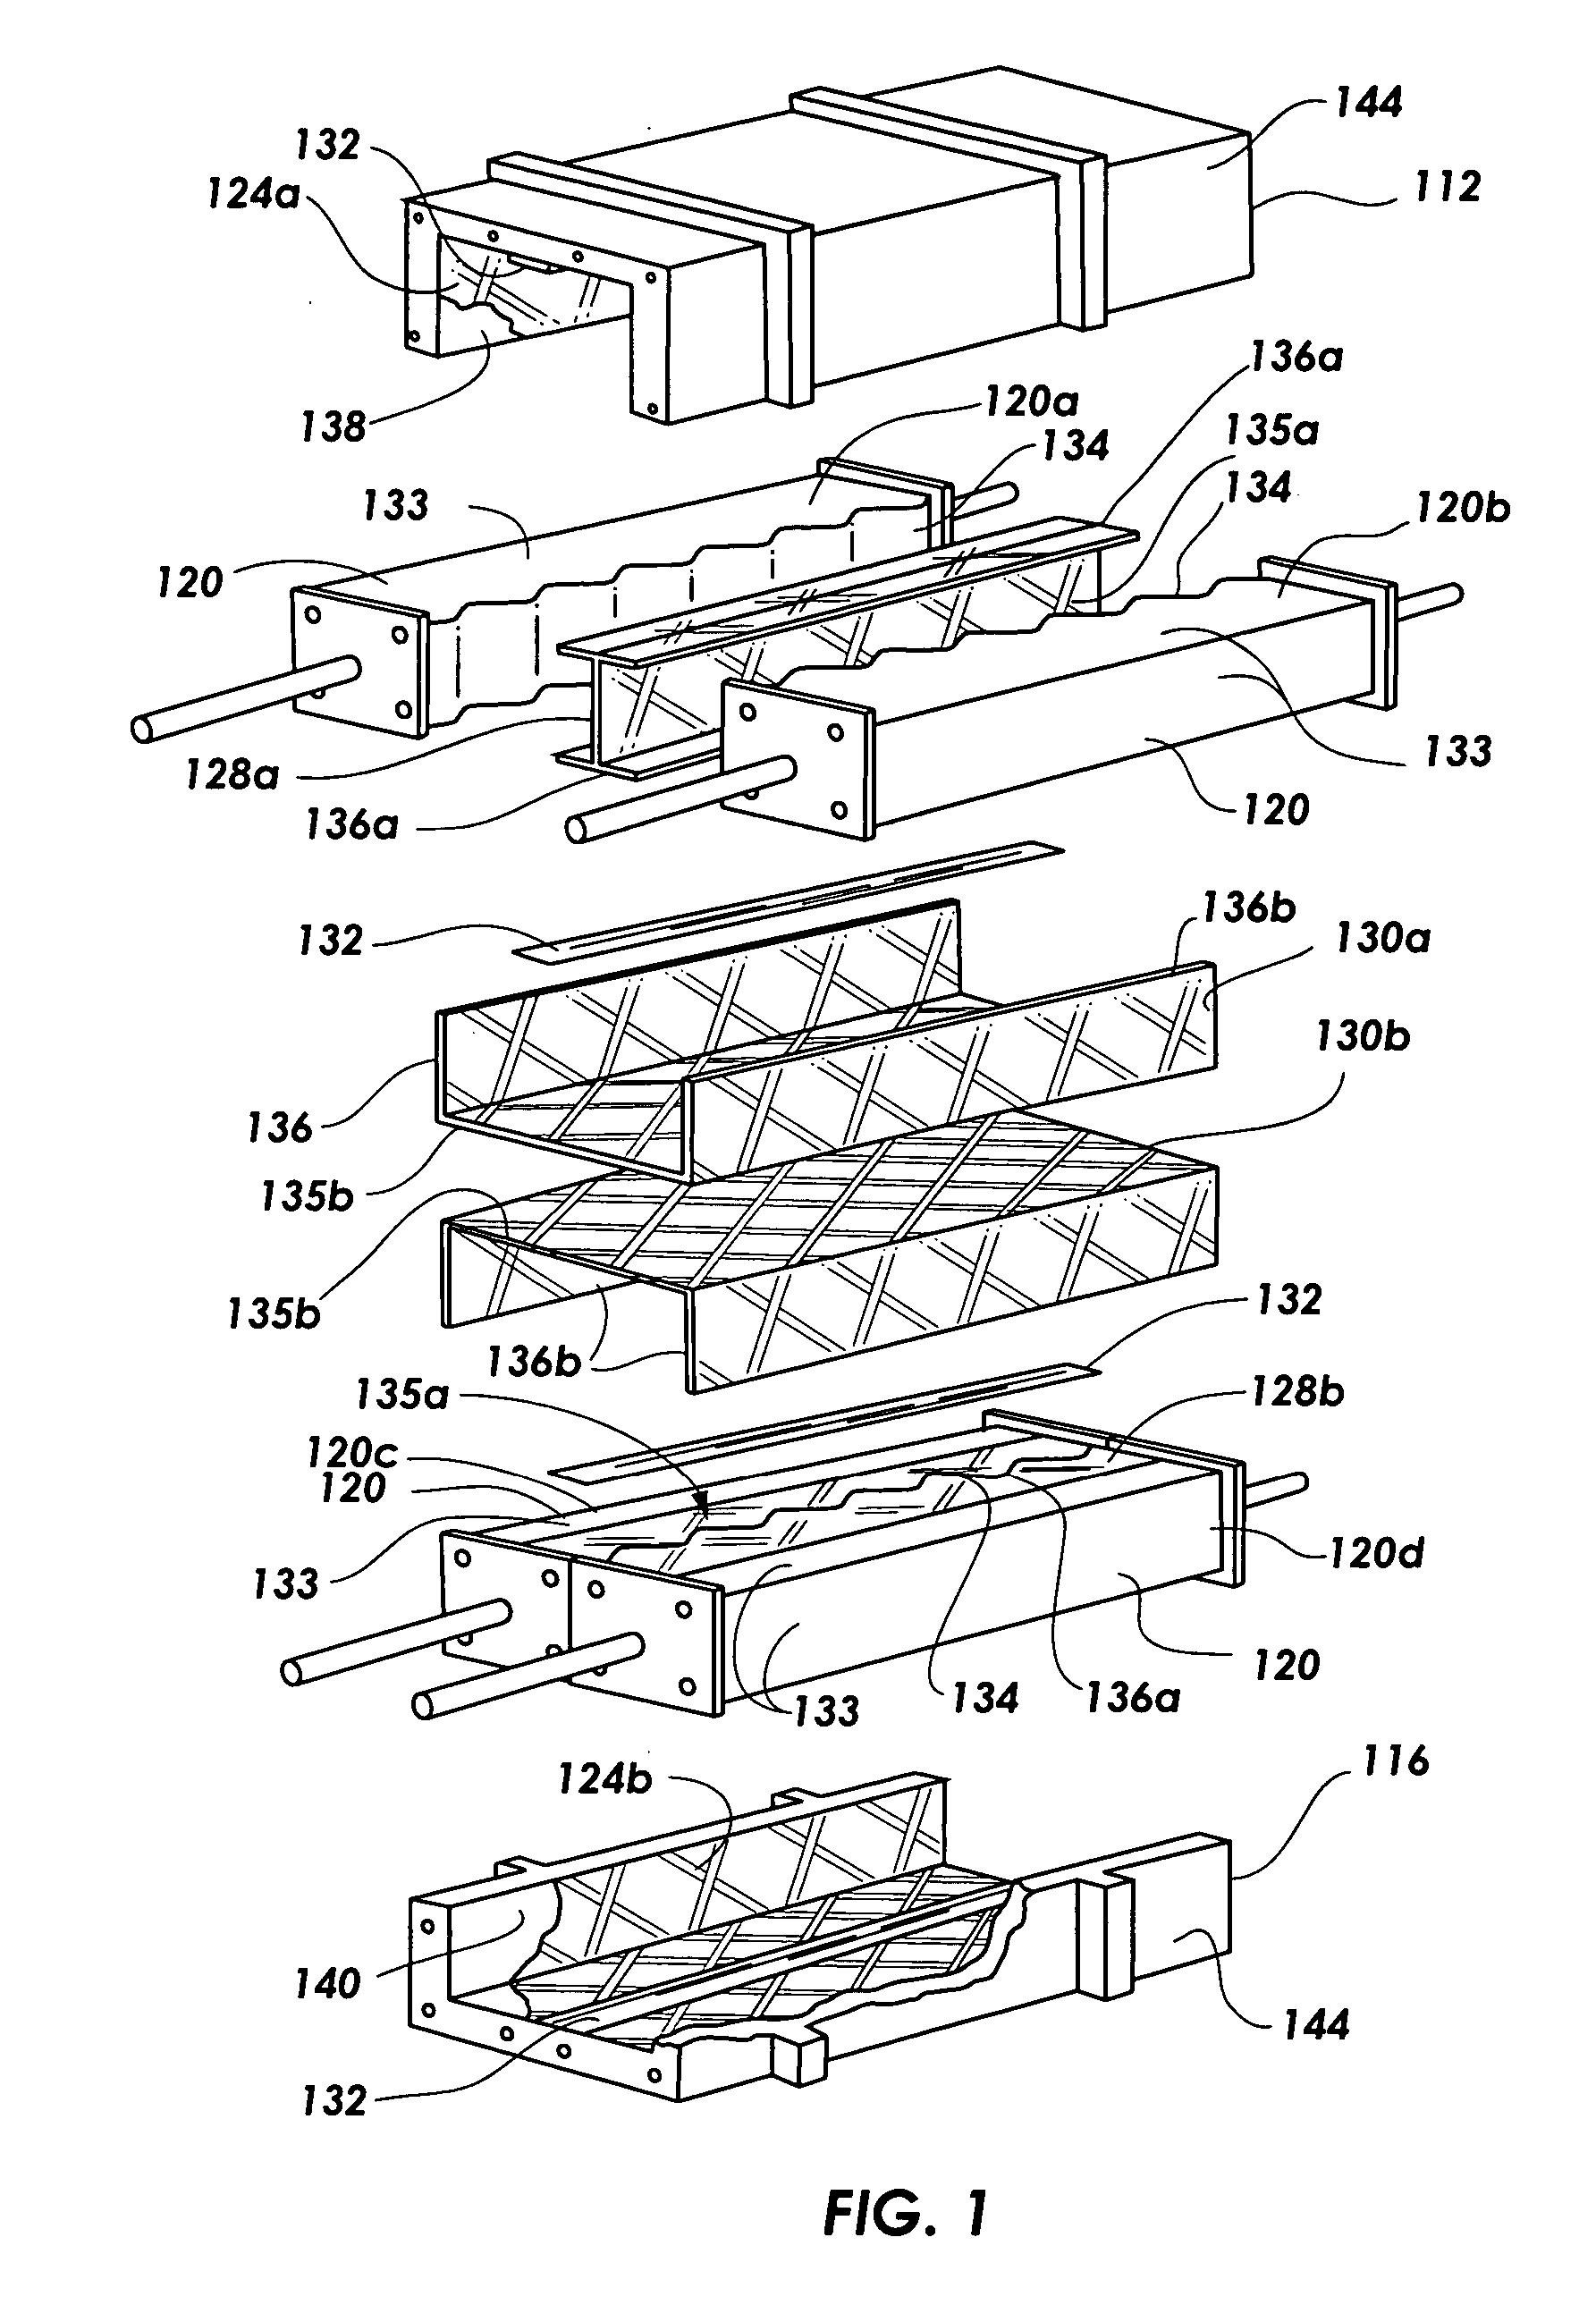 Method of assembling a single piece co-cured structure